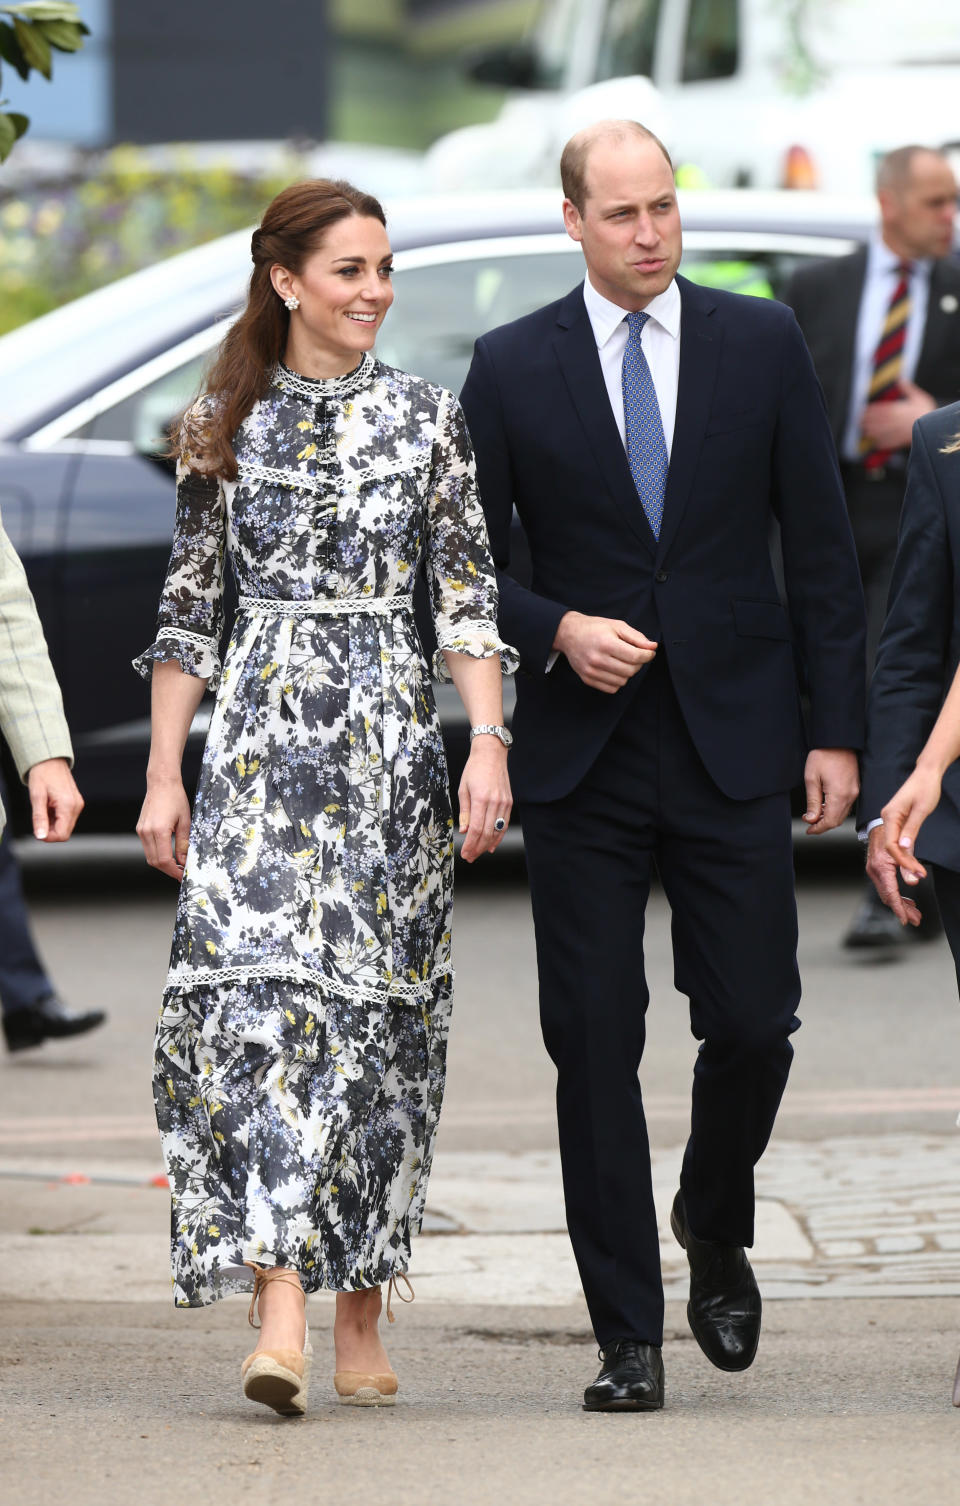 For the Chelsea Flower Show preview, the duchess donned a floral Erdem ‘Shebah’ maxi dress with her Castaner ‘Carina’ espadrille wedges and her Cassandra Goad pearl stud earrings. [Photo: PA]